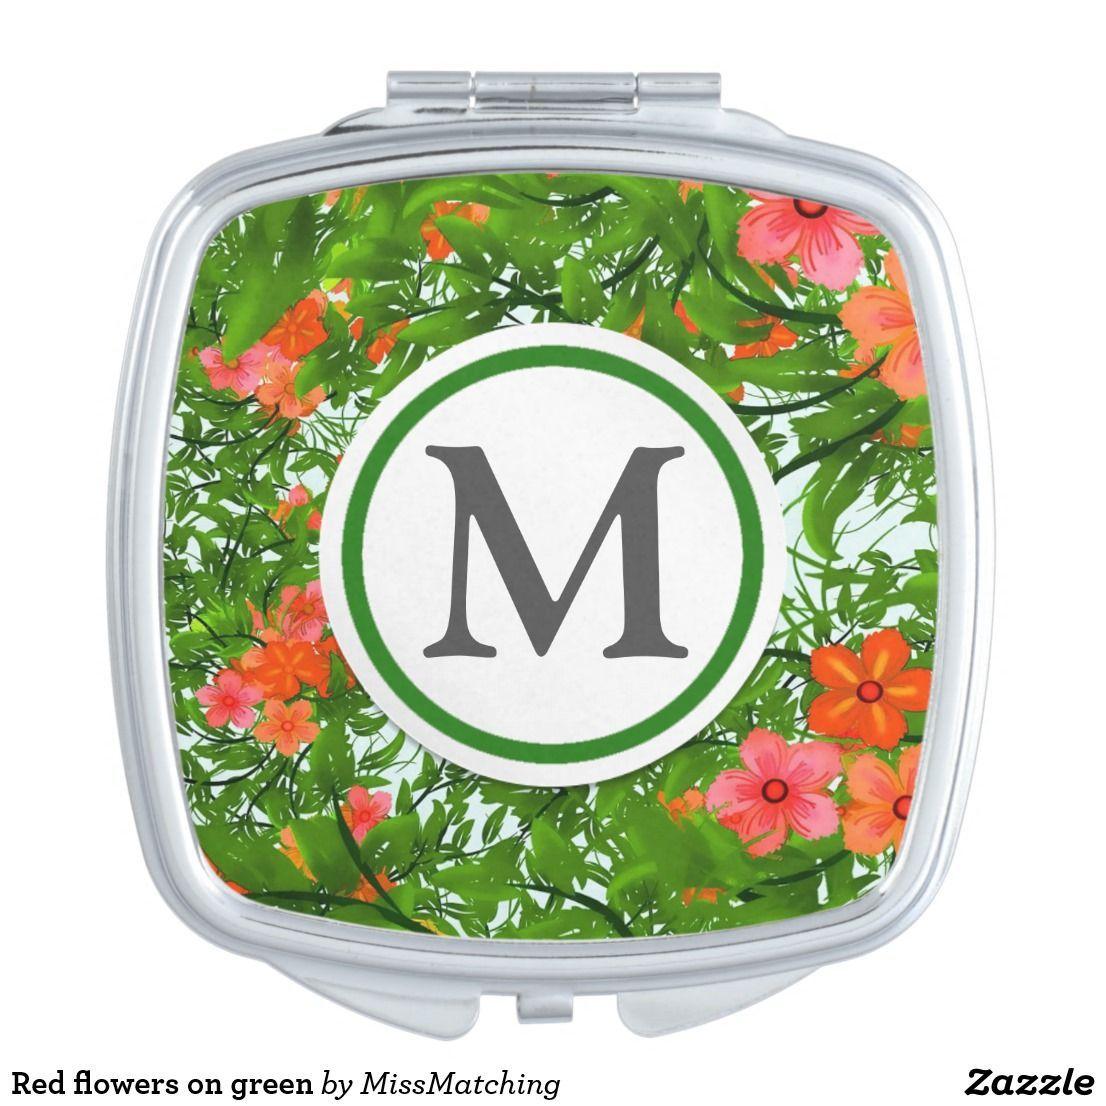 Red Flower with Green Logo - Red flowers on green makeup mirror. Compact Mirrors. Compact